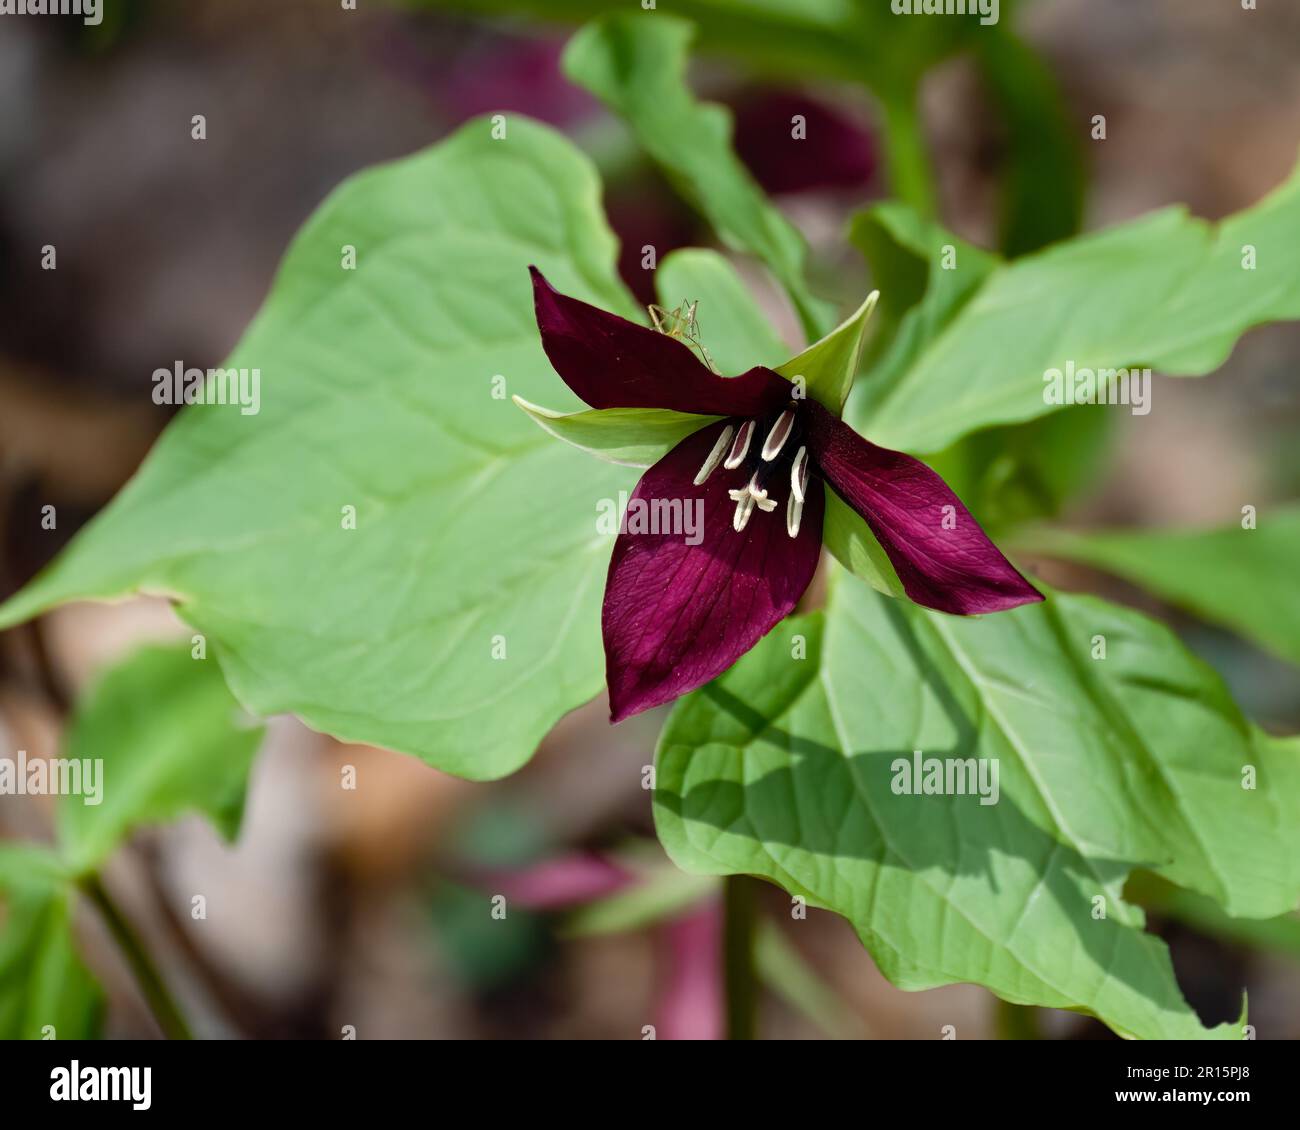 A red trillium, Trillium erectum, growing in the wild Adirondack Mountains, NY USA forest with a stick insect on one of the petals. Stock Photo